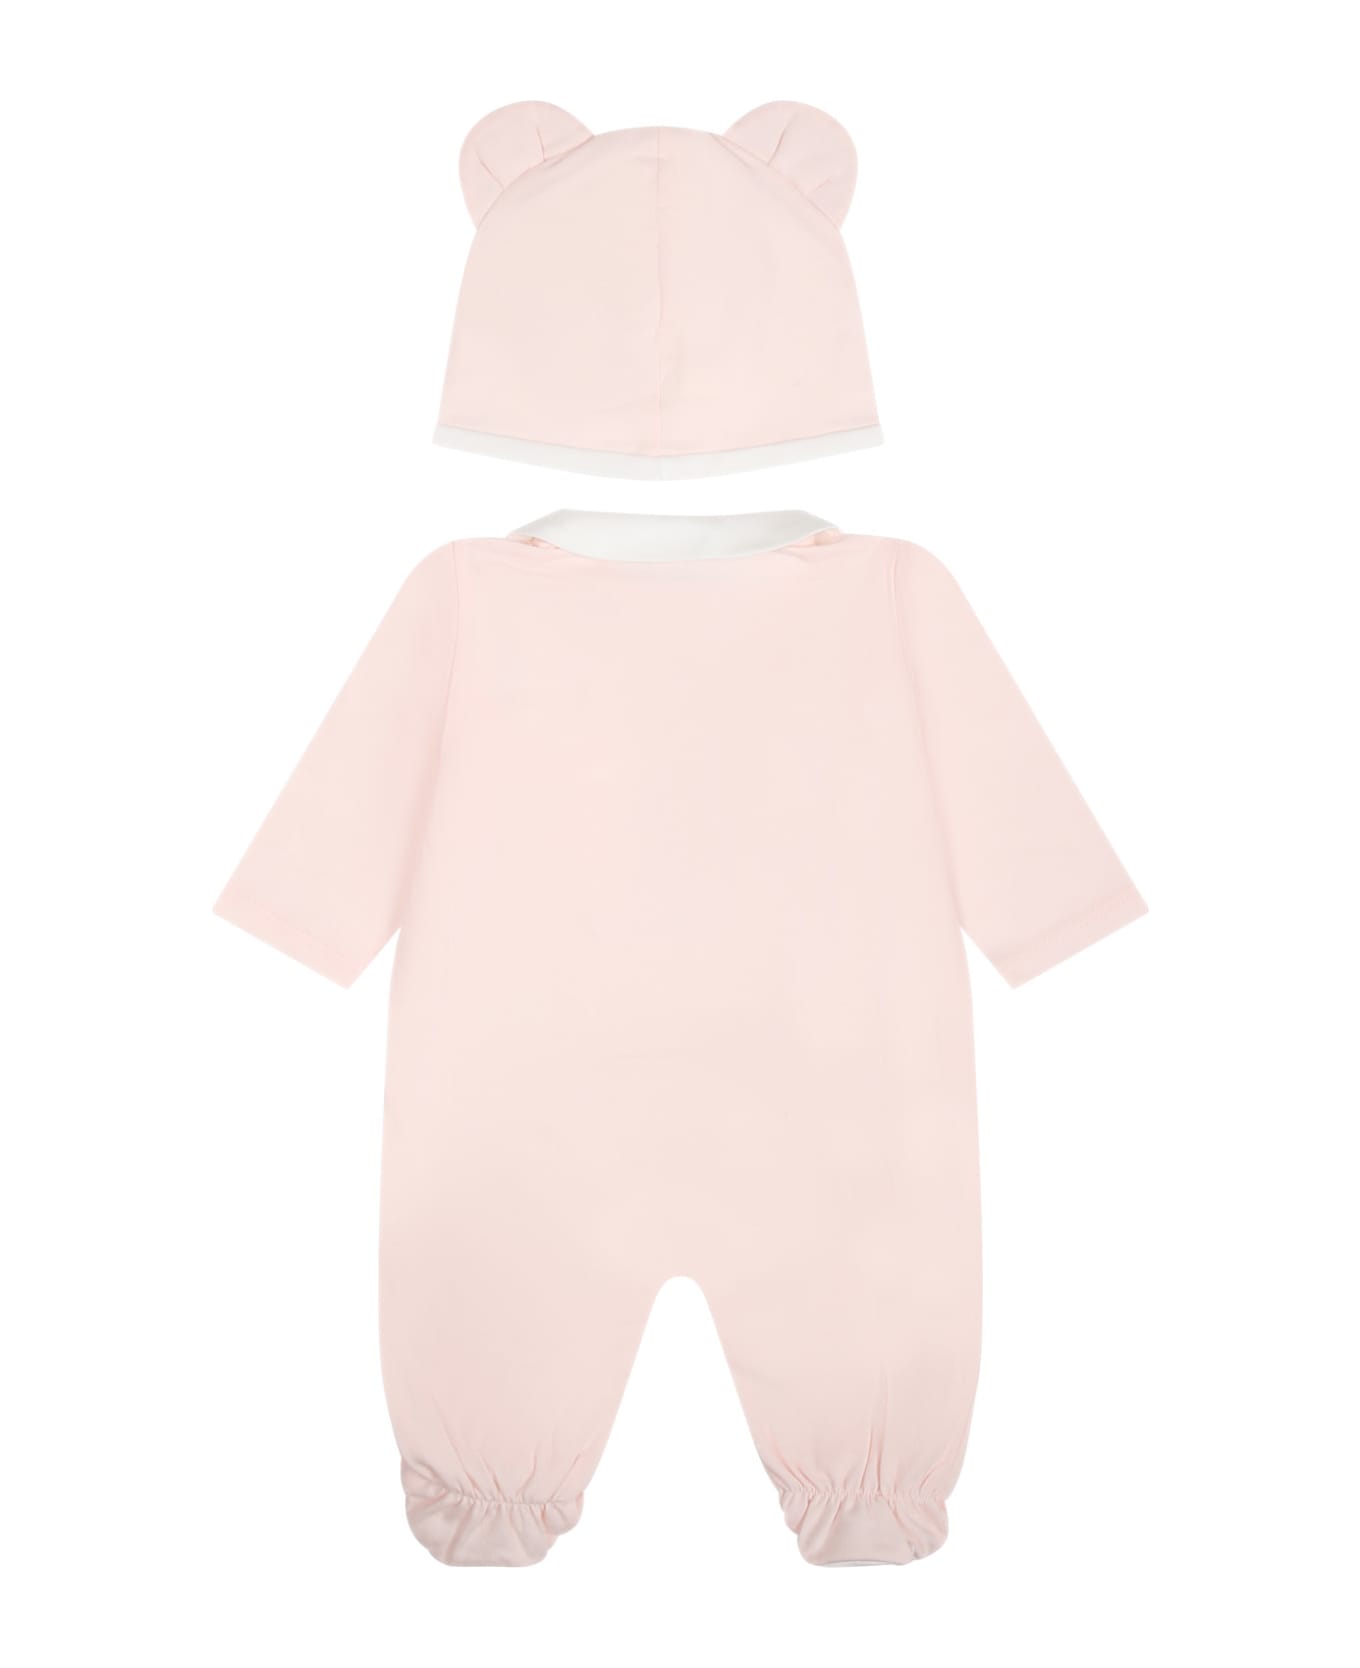 Fendi obcasie Pink Set For Baby Girl With Fendi obcasie Bear - Pink